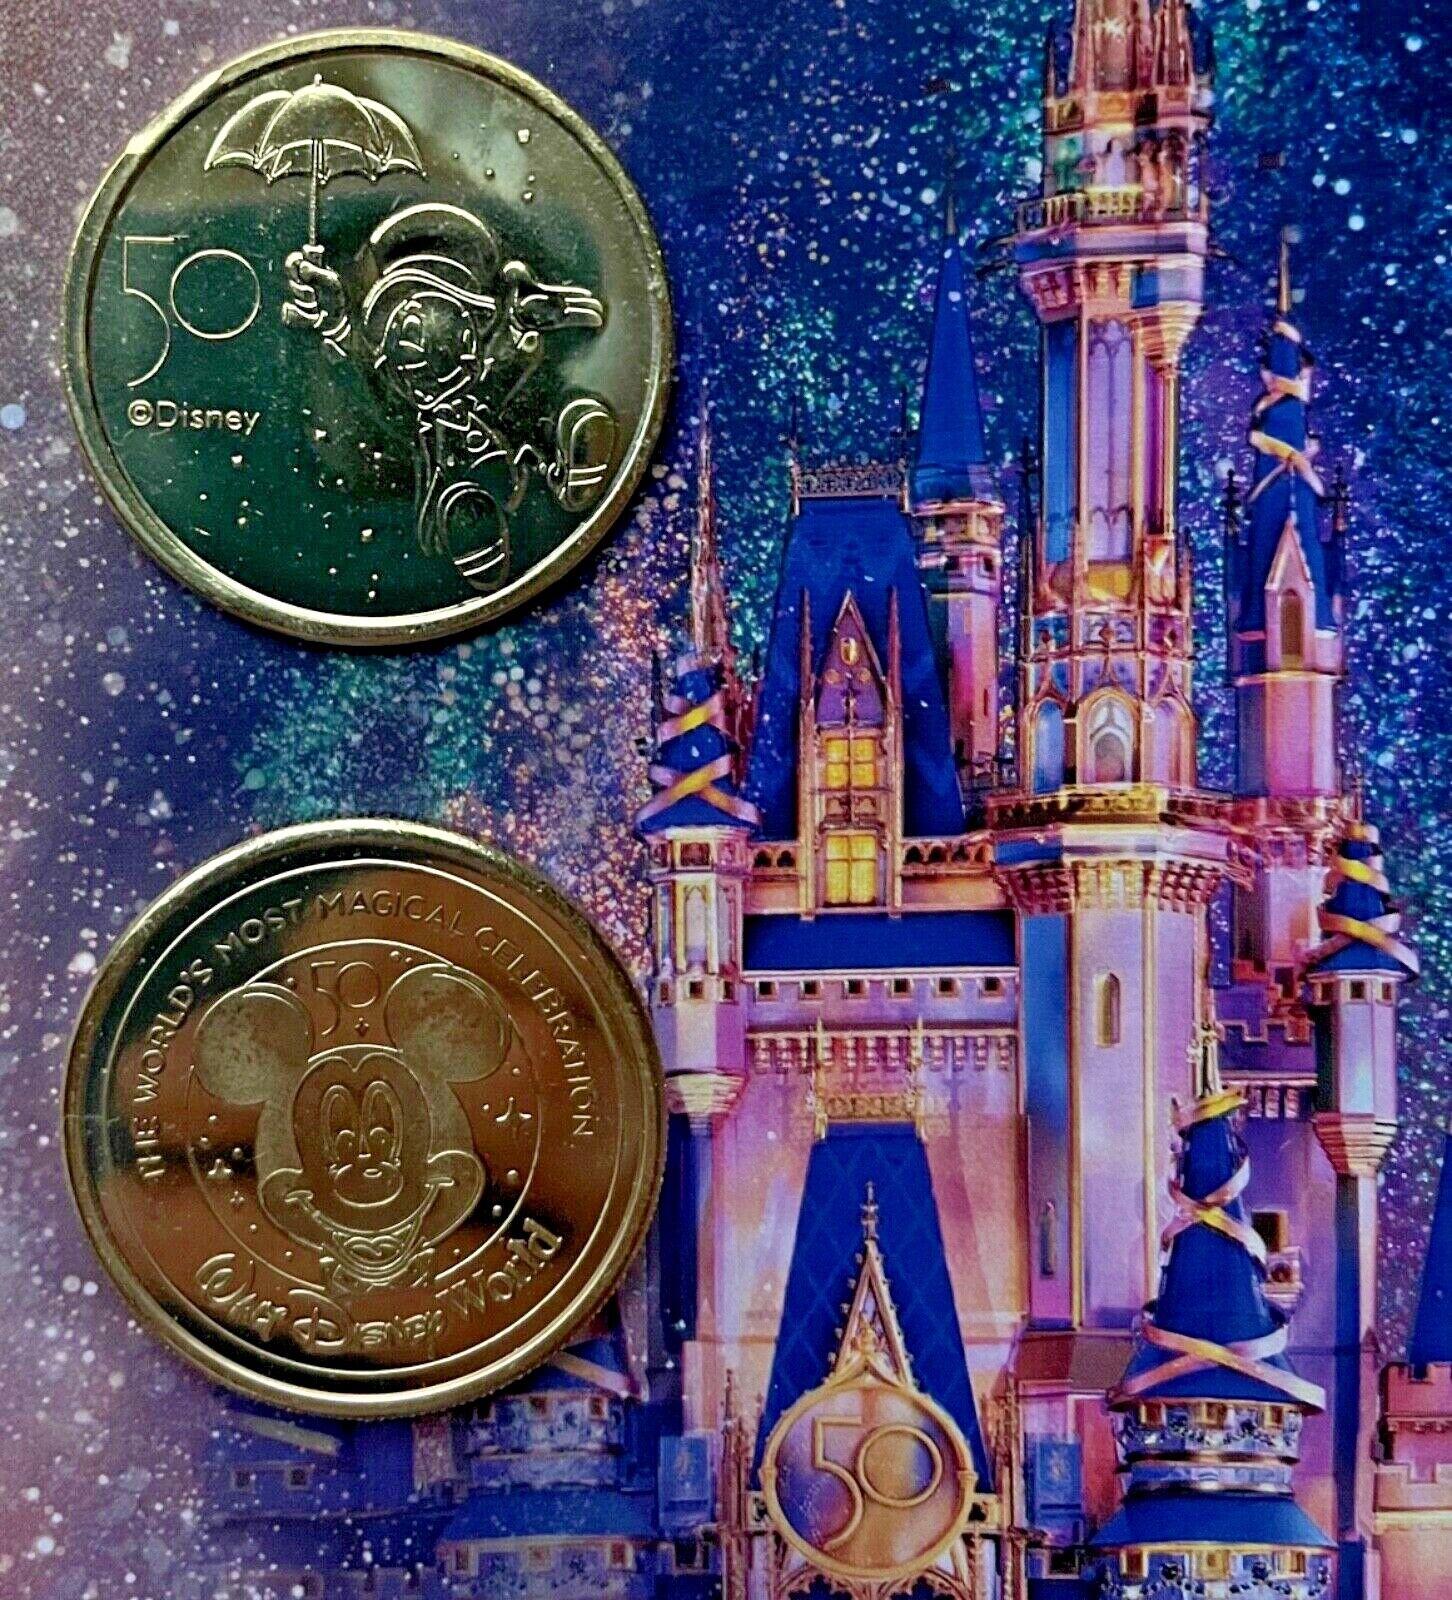 Walt Disney World 50th Anniversary Commemorative Gold Coins all characters